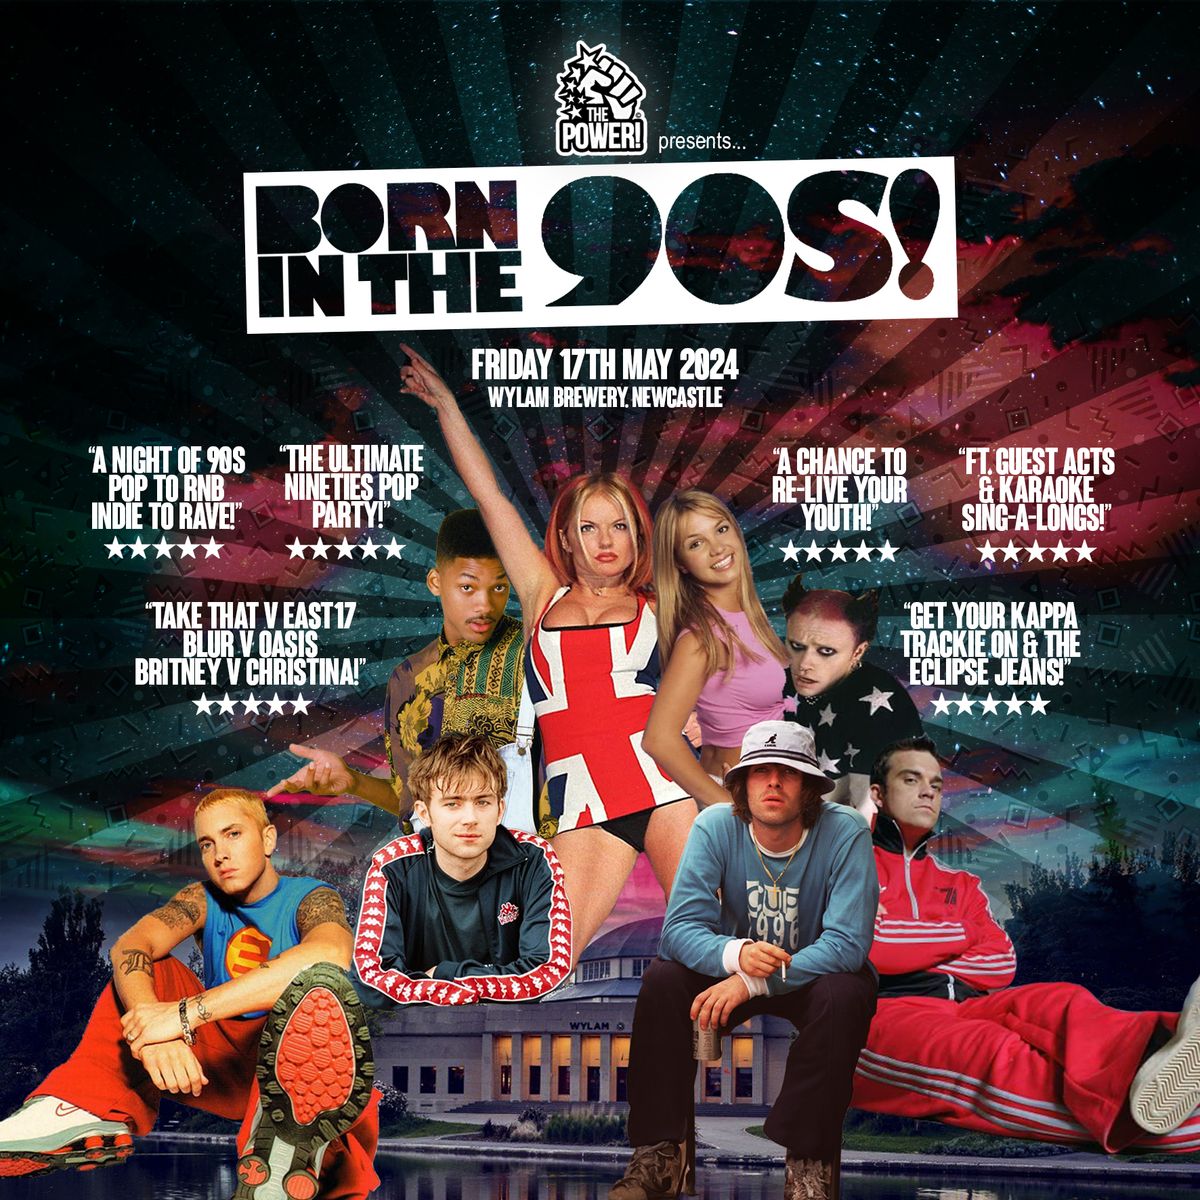 BORN IN THE 90S! "The Ultimate 90s Flashback!" - Wylam Brewery